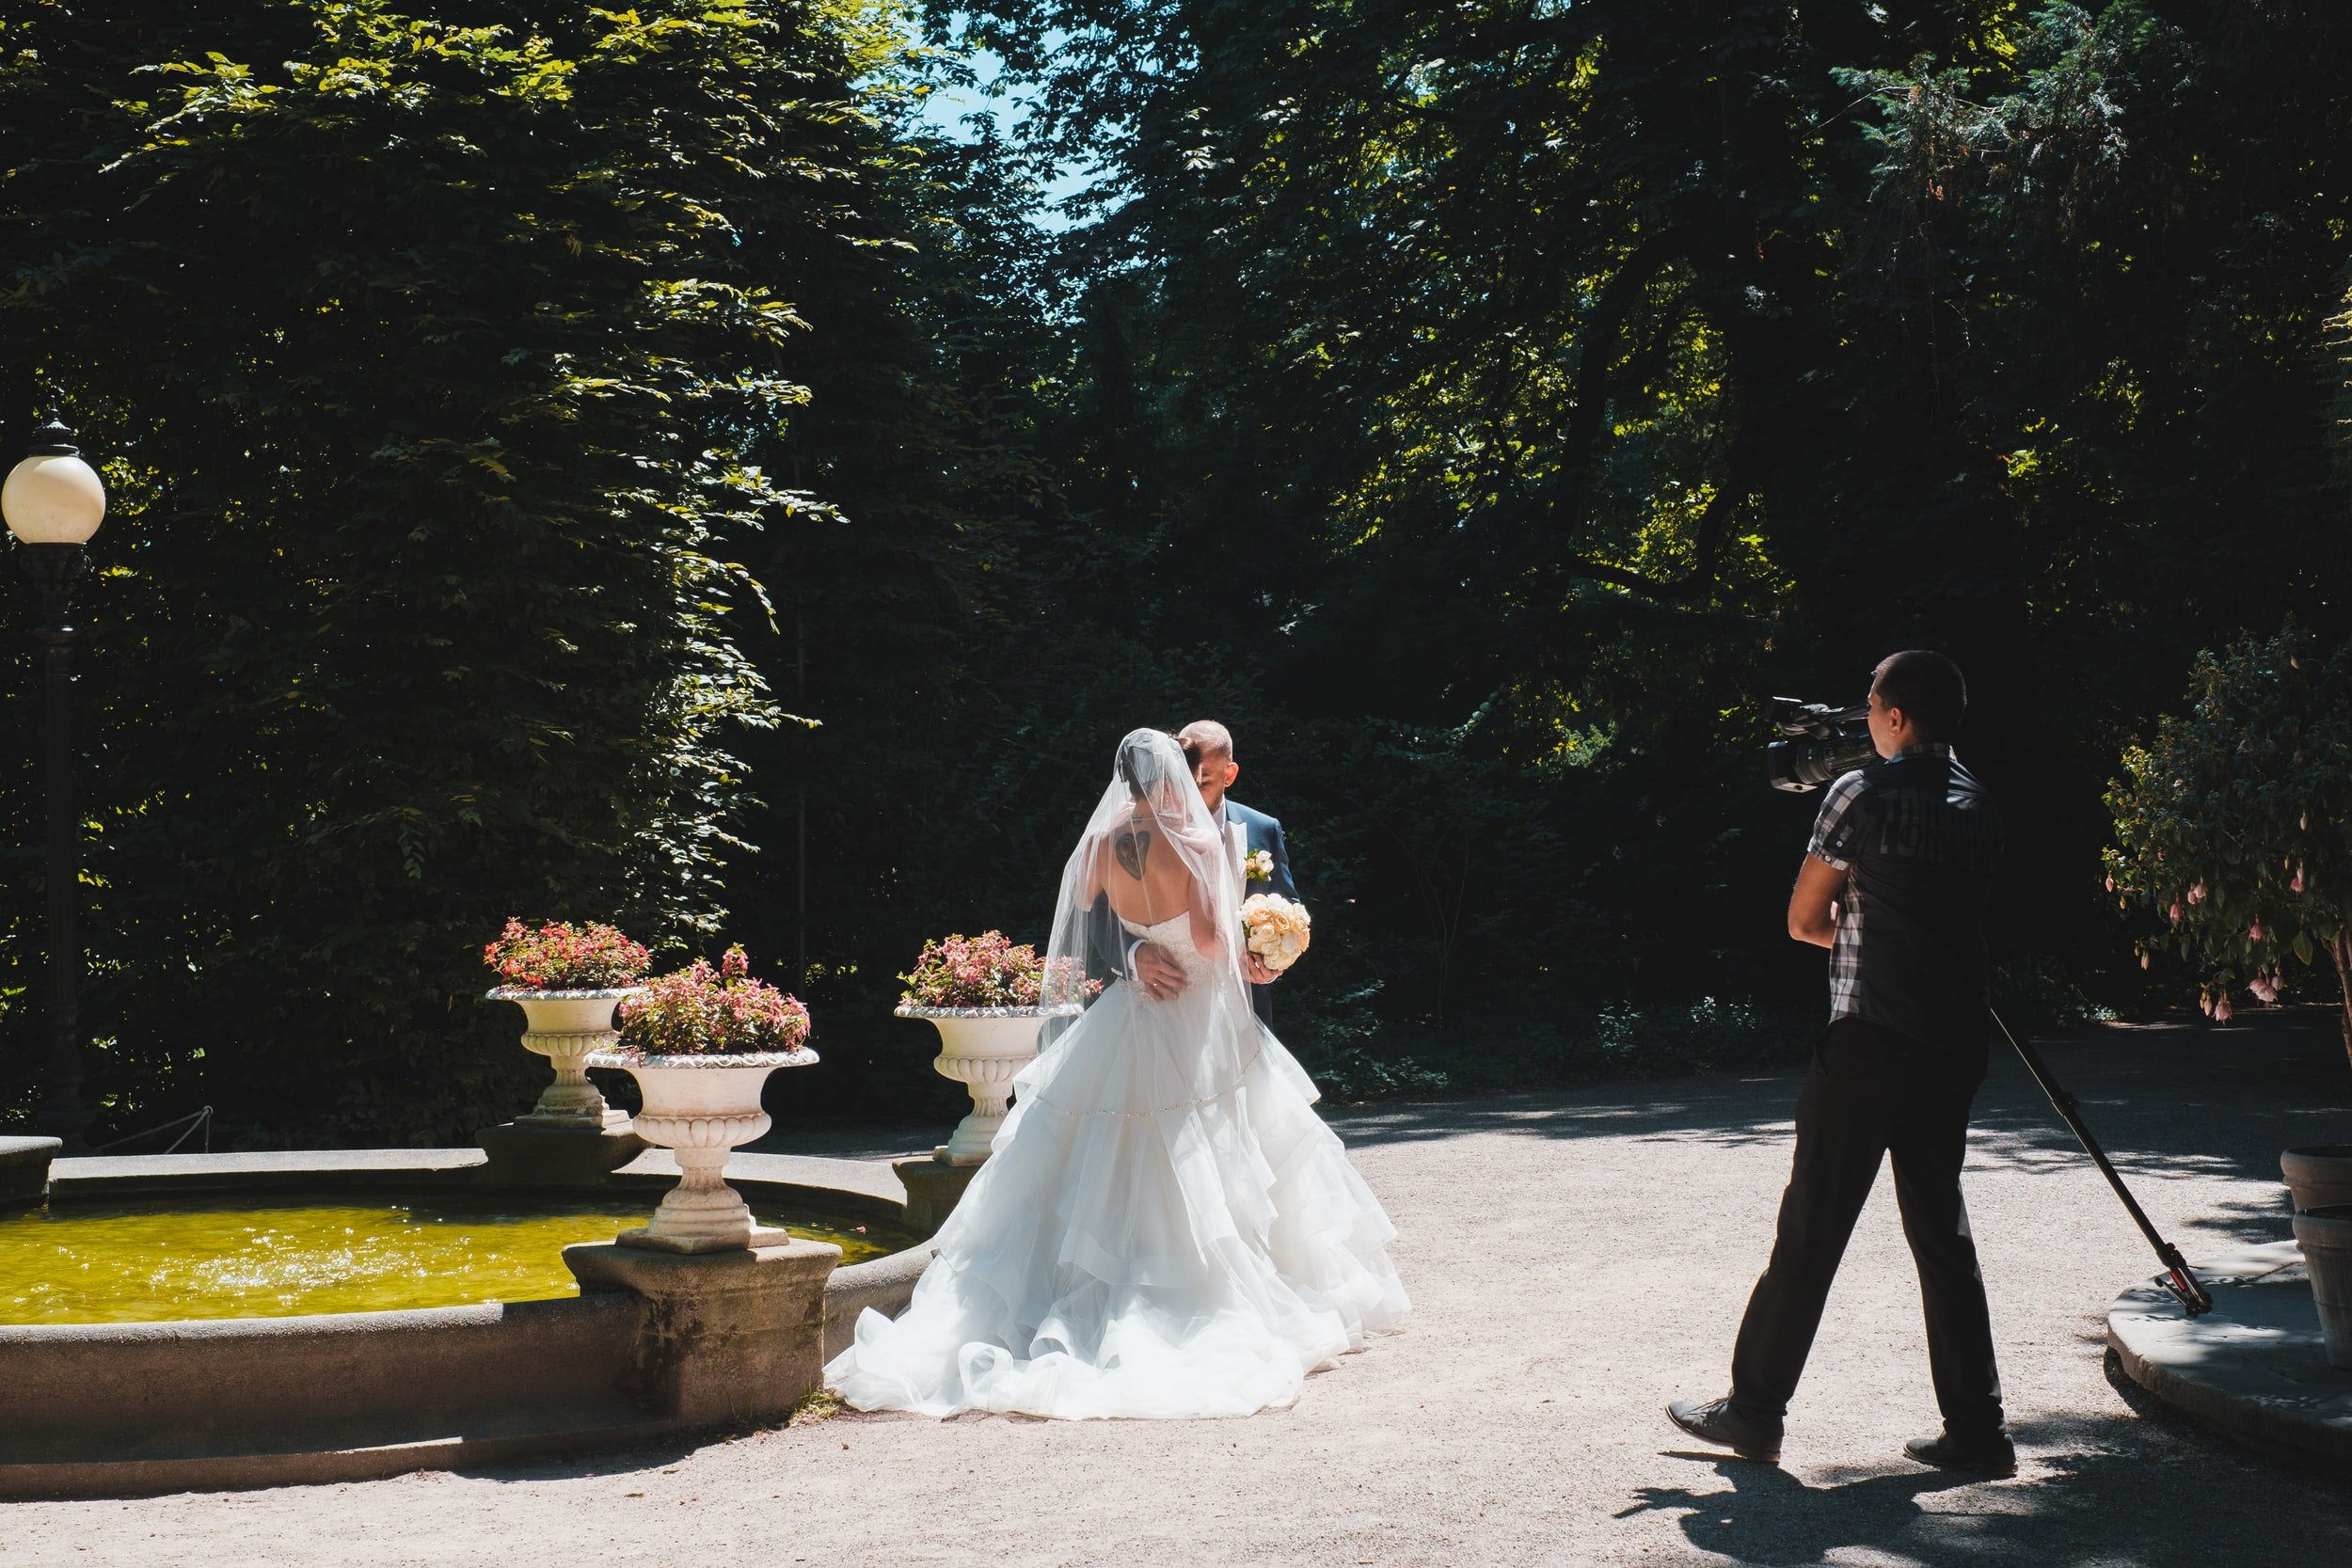 How much does a wedding videographer cost? — Wedding